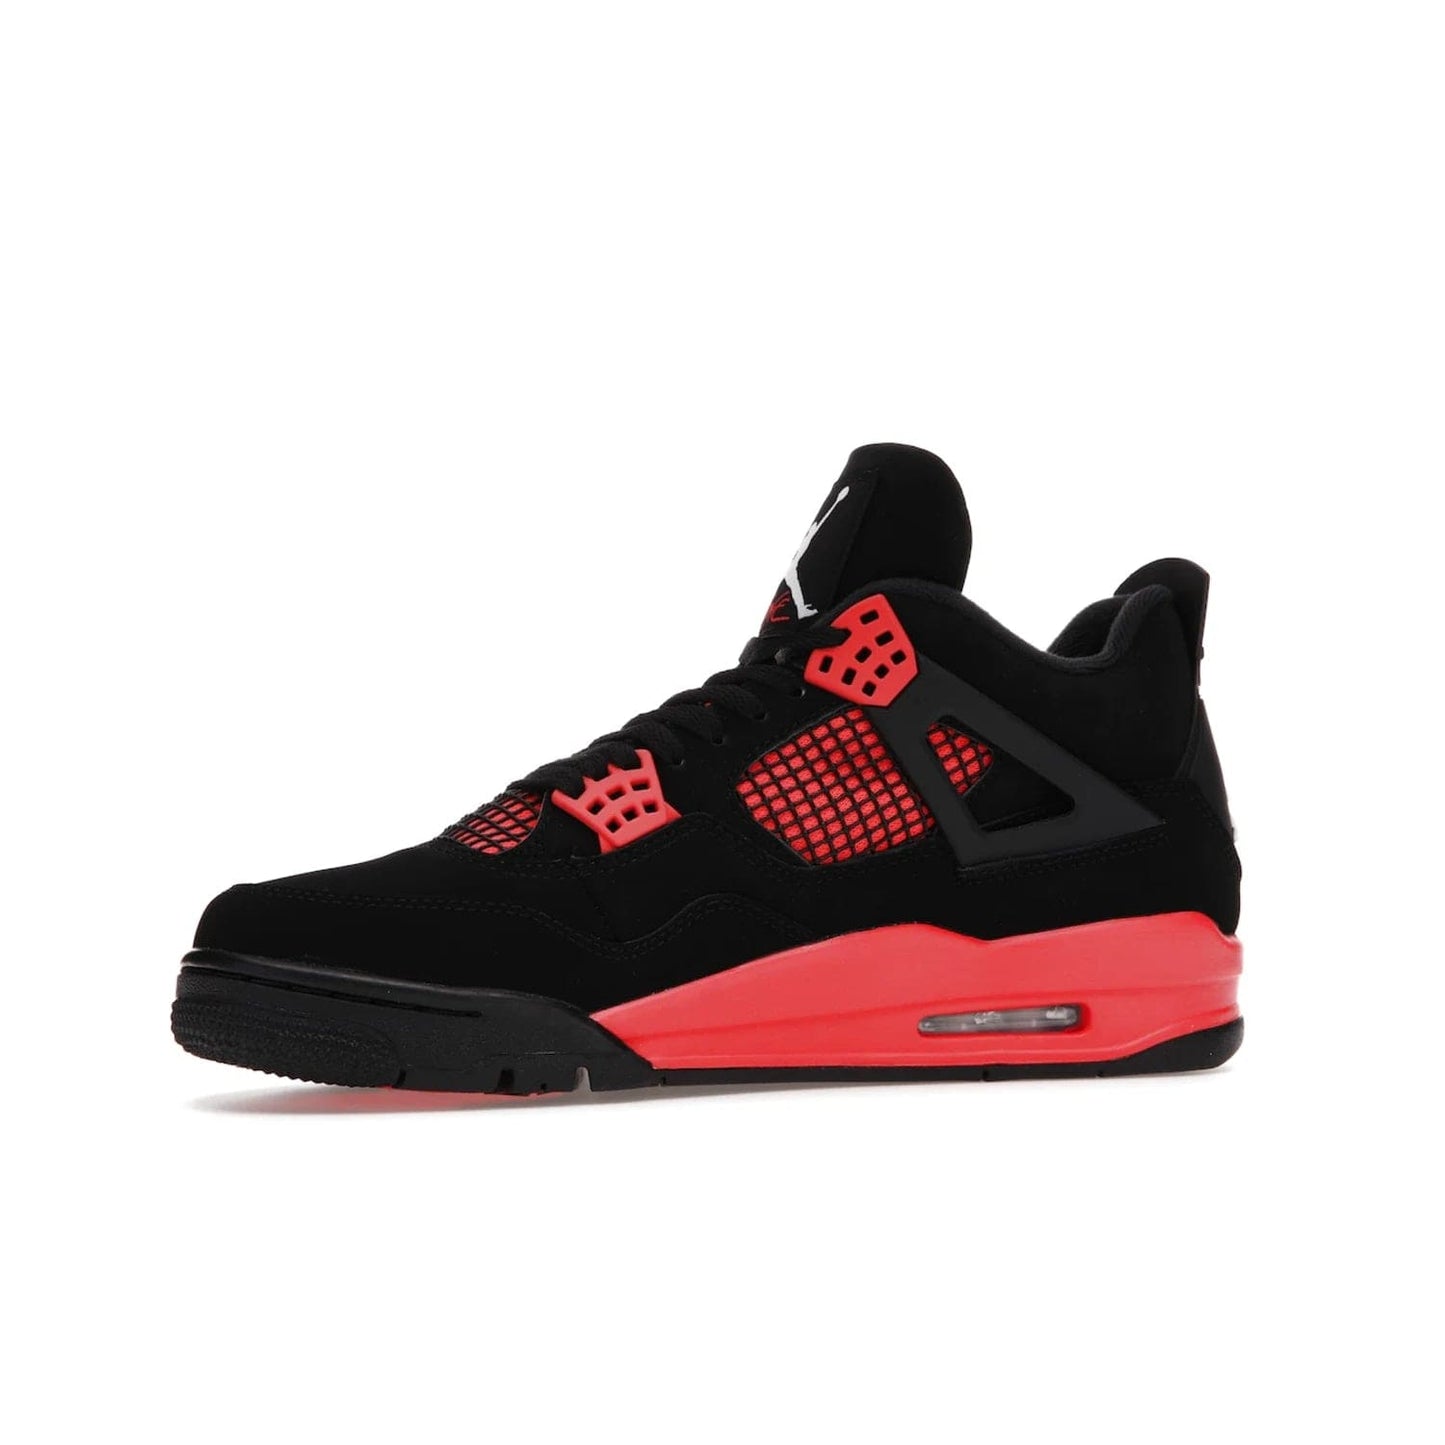 Jordan 4 Retro Red Thunder - Image 17 - Only at www.BallersClubKickz.com - Upscale your footwear with the Air Jordan 4 Retro Red Thunder. Featuring a Durabuck upper, red underlays, signature Flight patch, and vibrant red midsole, this retro sneaker adds style and edge. Releases in January 2022.